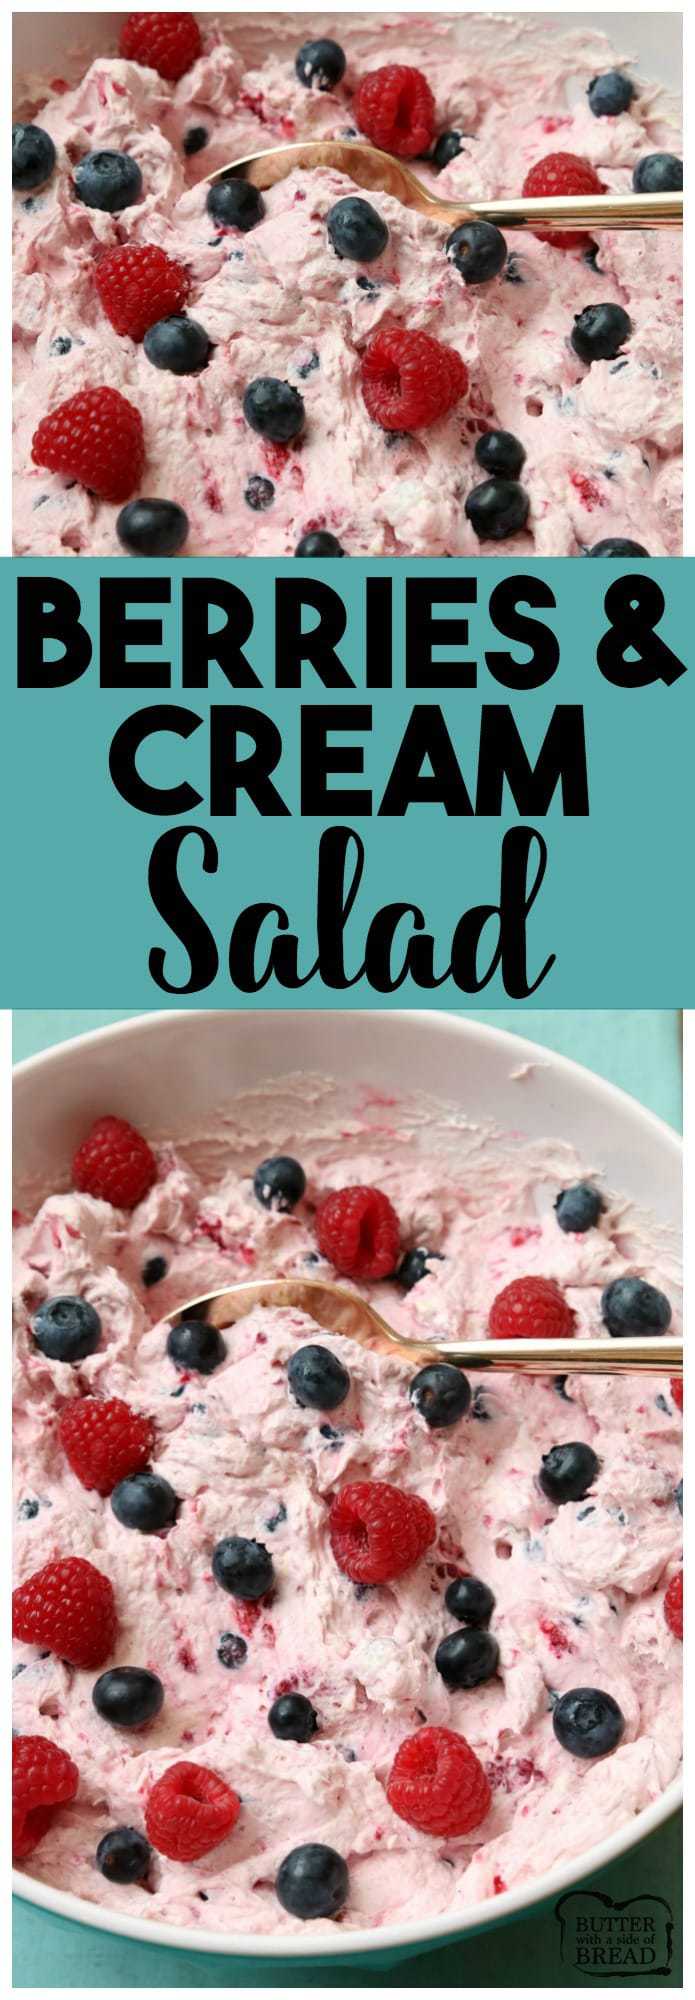 Berries and Cream Salad made using just 4 ingredients! Raspberries & Blueberries combine with Greek Yogurt, pudding mix and whipped topping to create a lovely creamy berry salad.